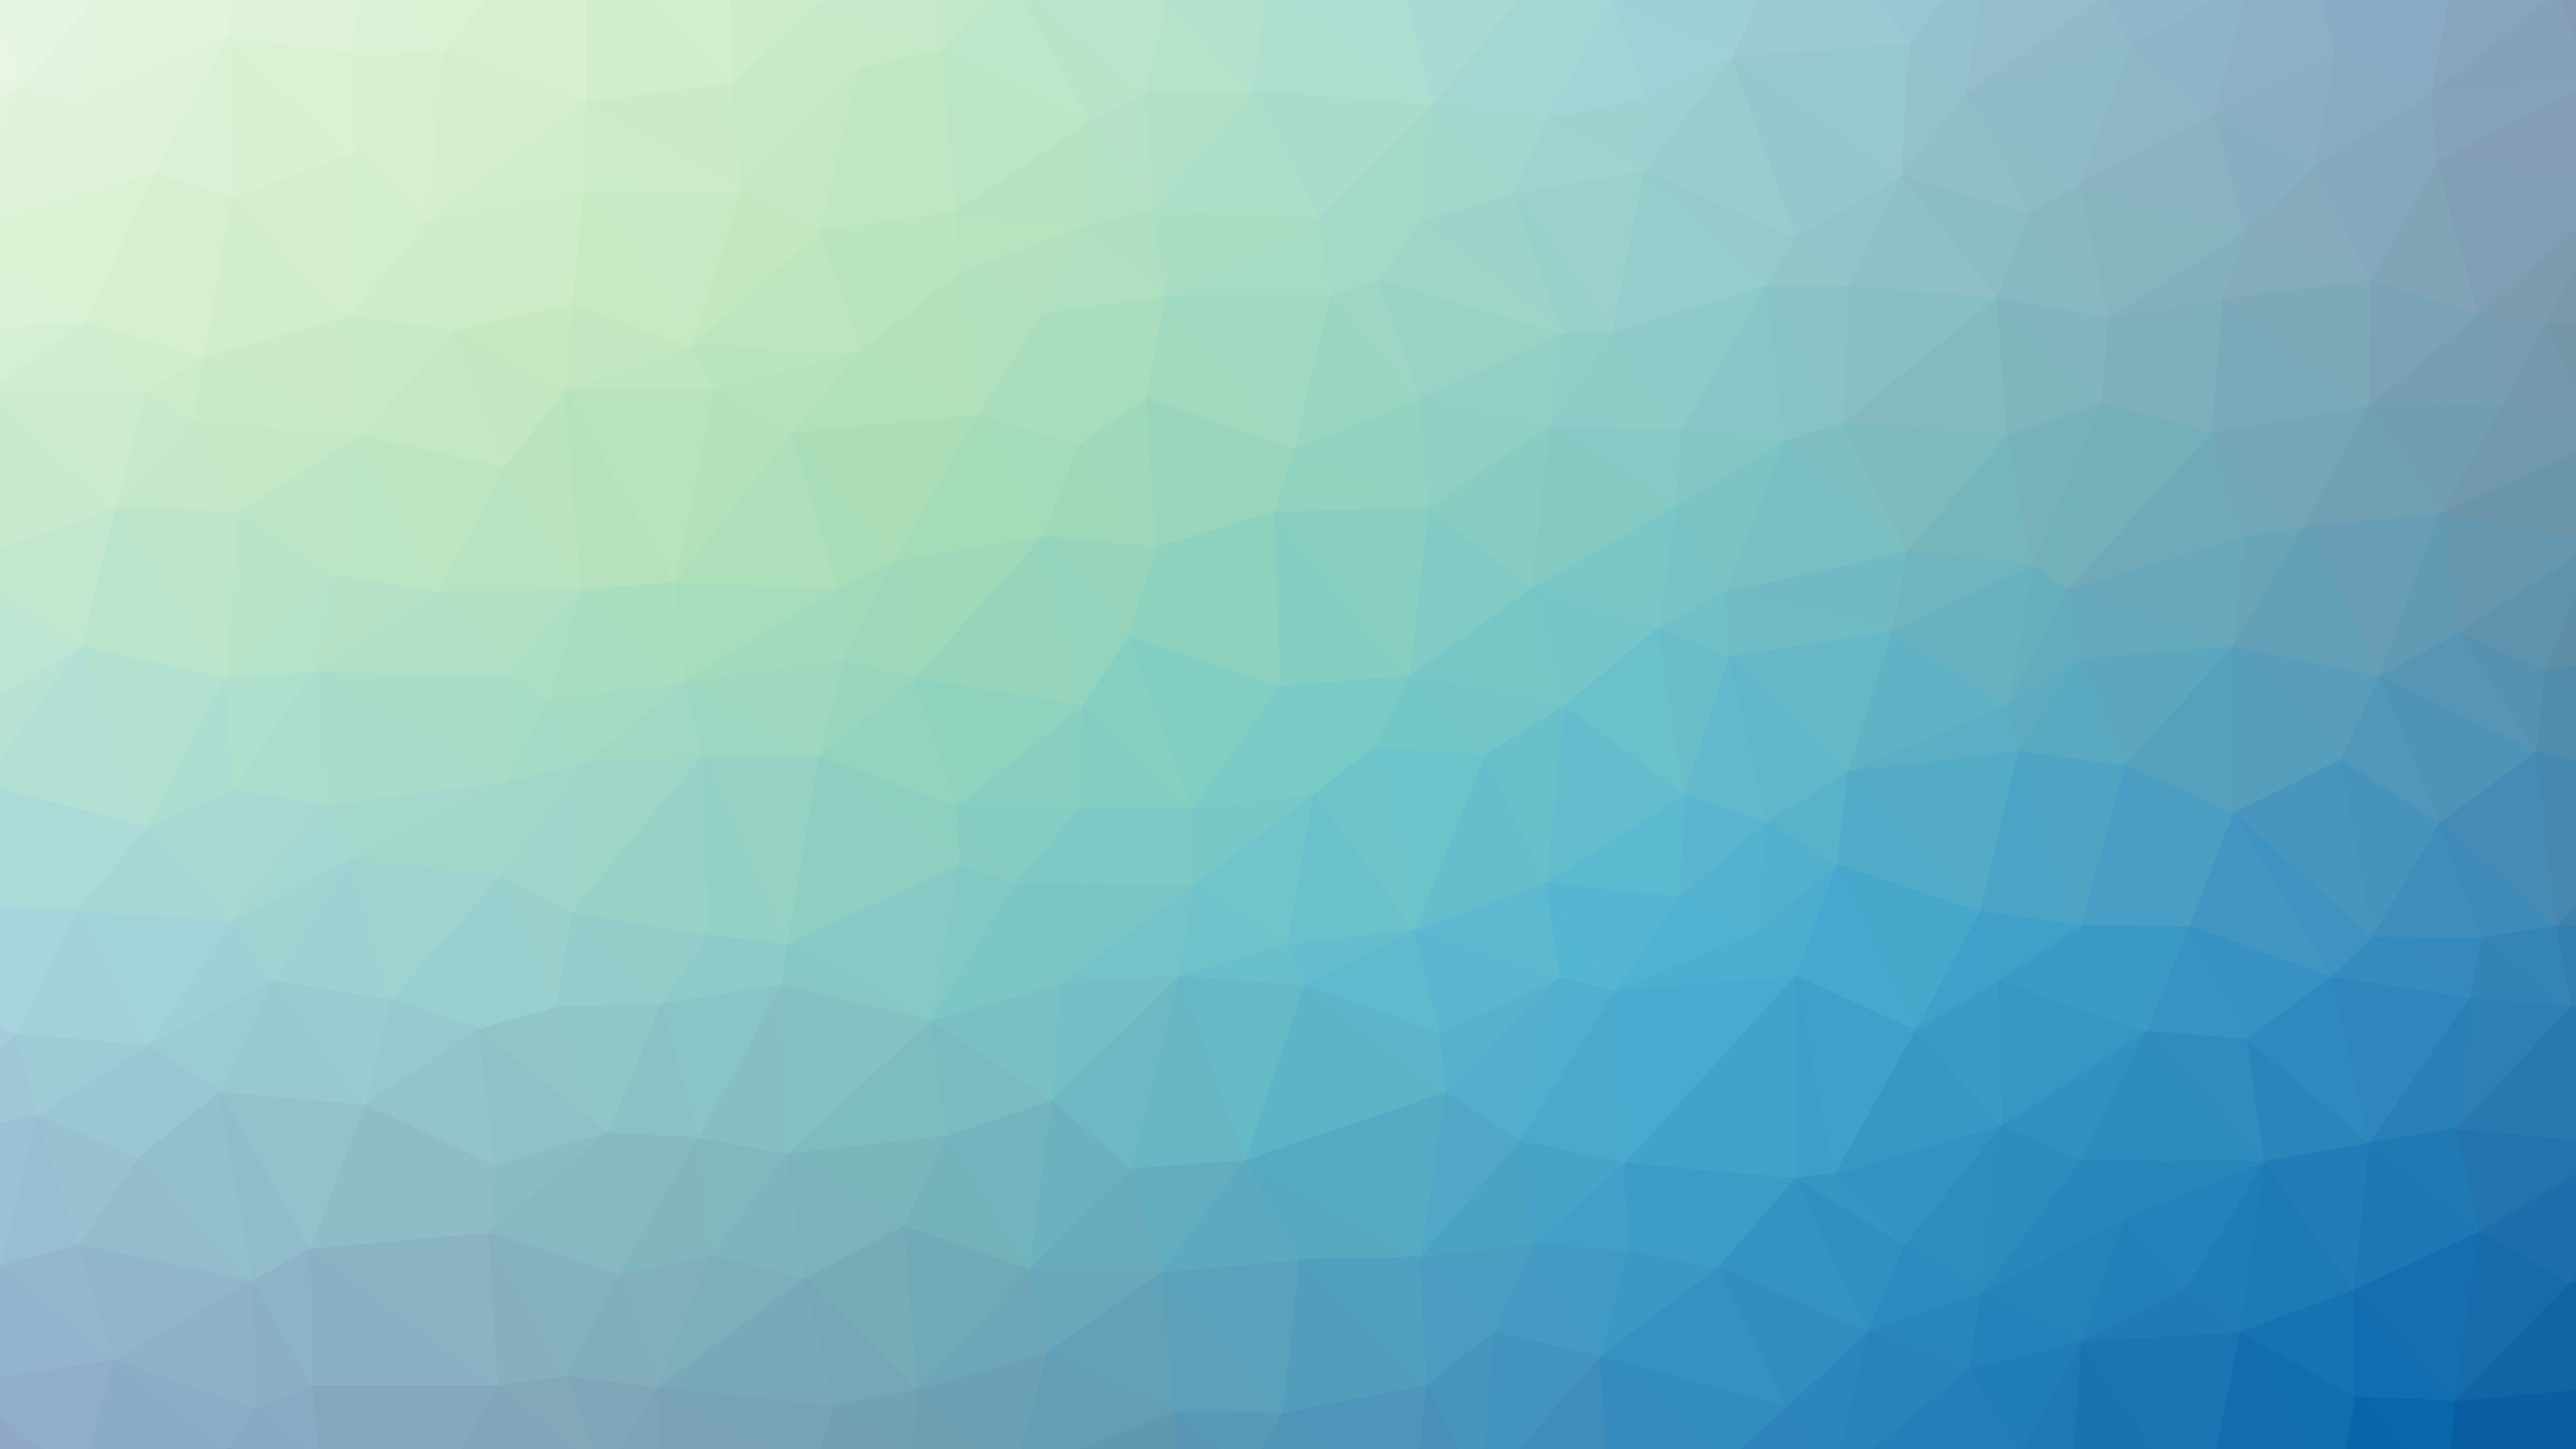 General 3840x2160 low poly texture simple background cyan background